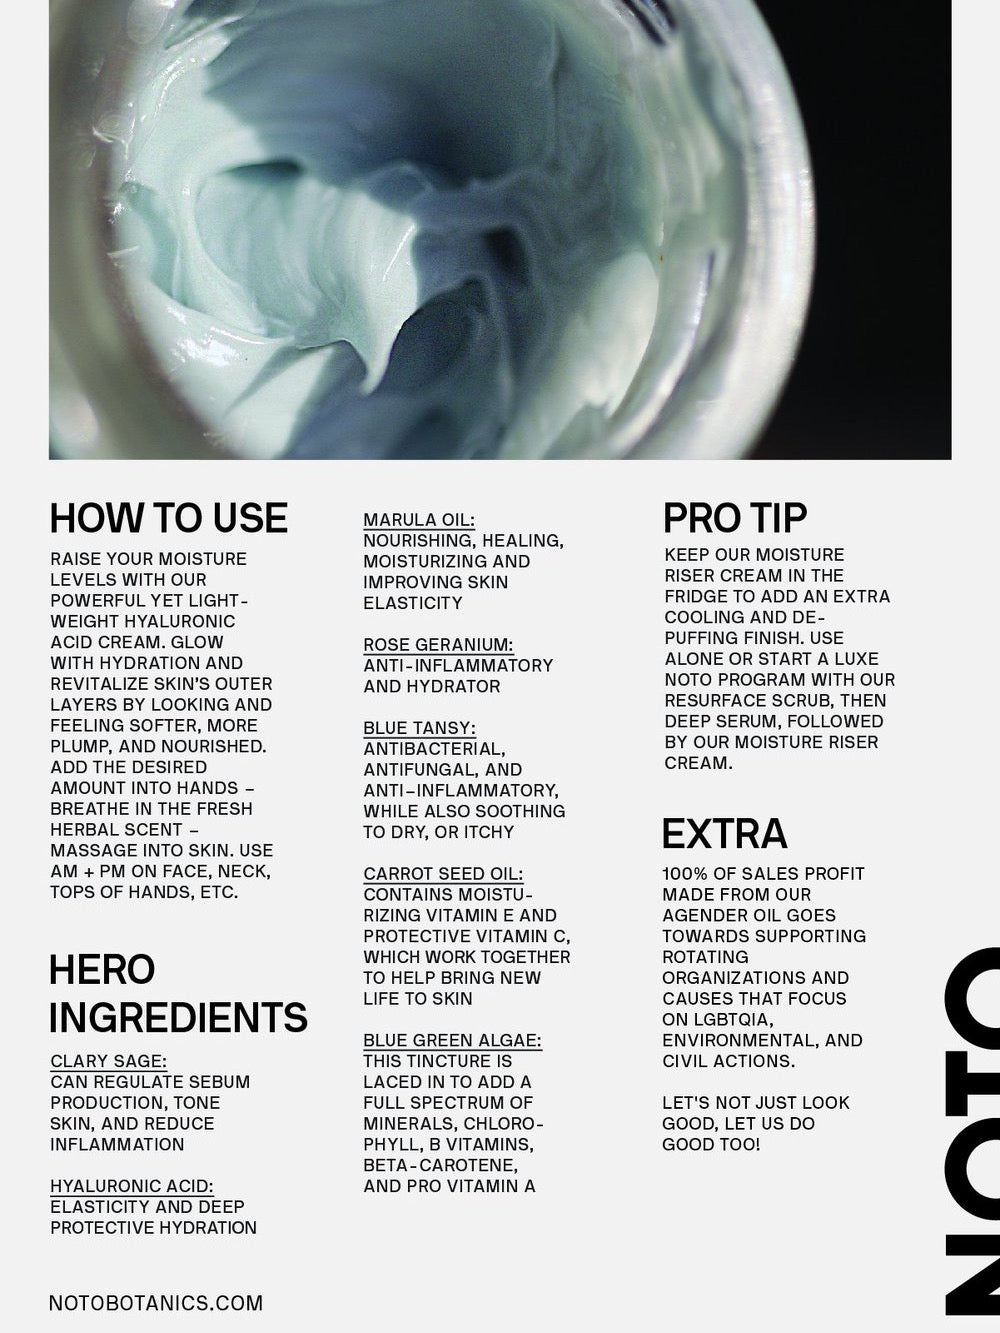 A NOTO poster showing how to use a Moisture Riser Cream.